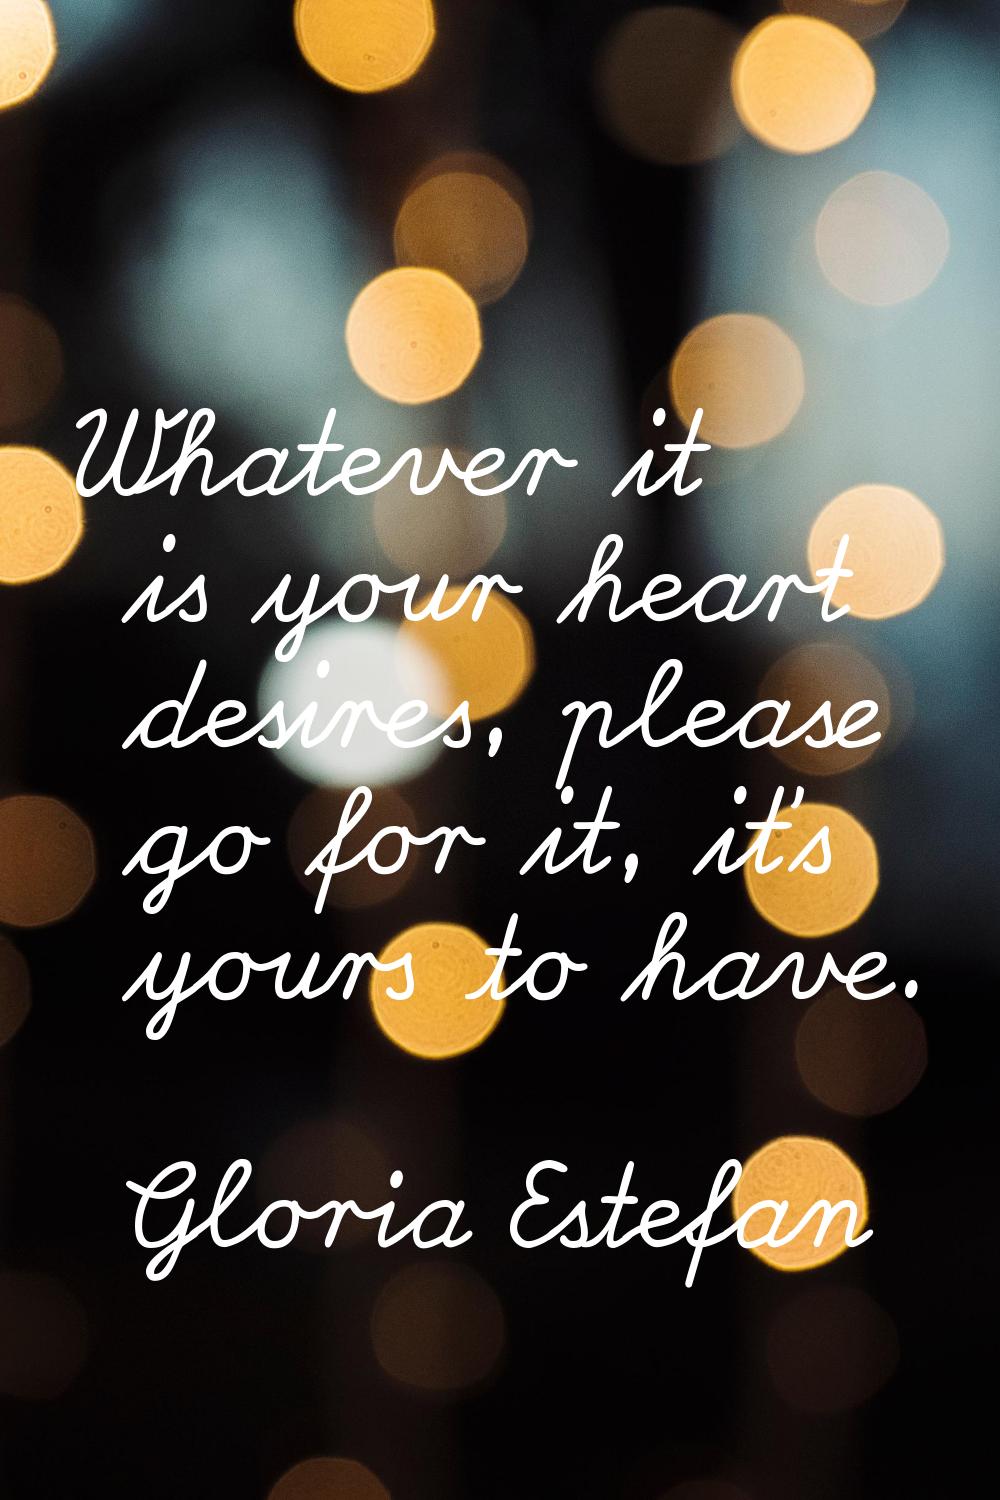 Whatever it is your heart desires, please go for it, it's yours to have.